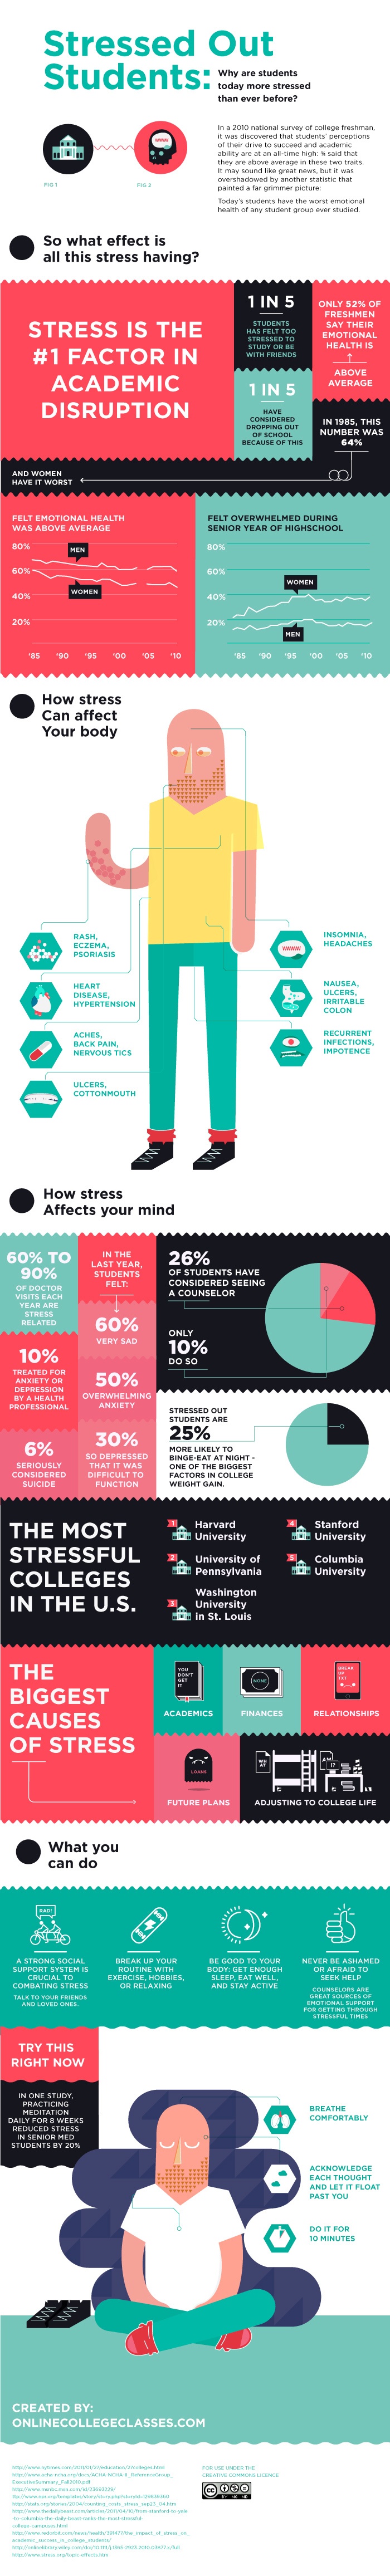 The Stressed Out Students Infographic